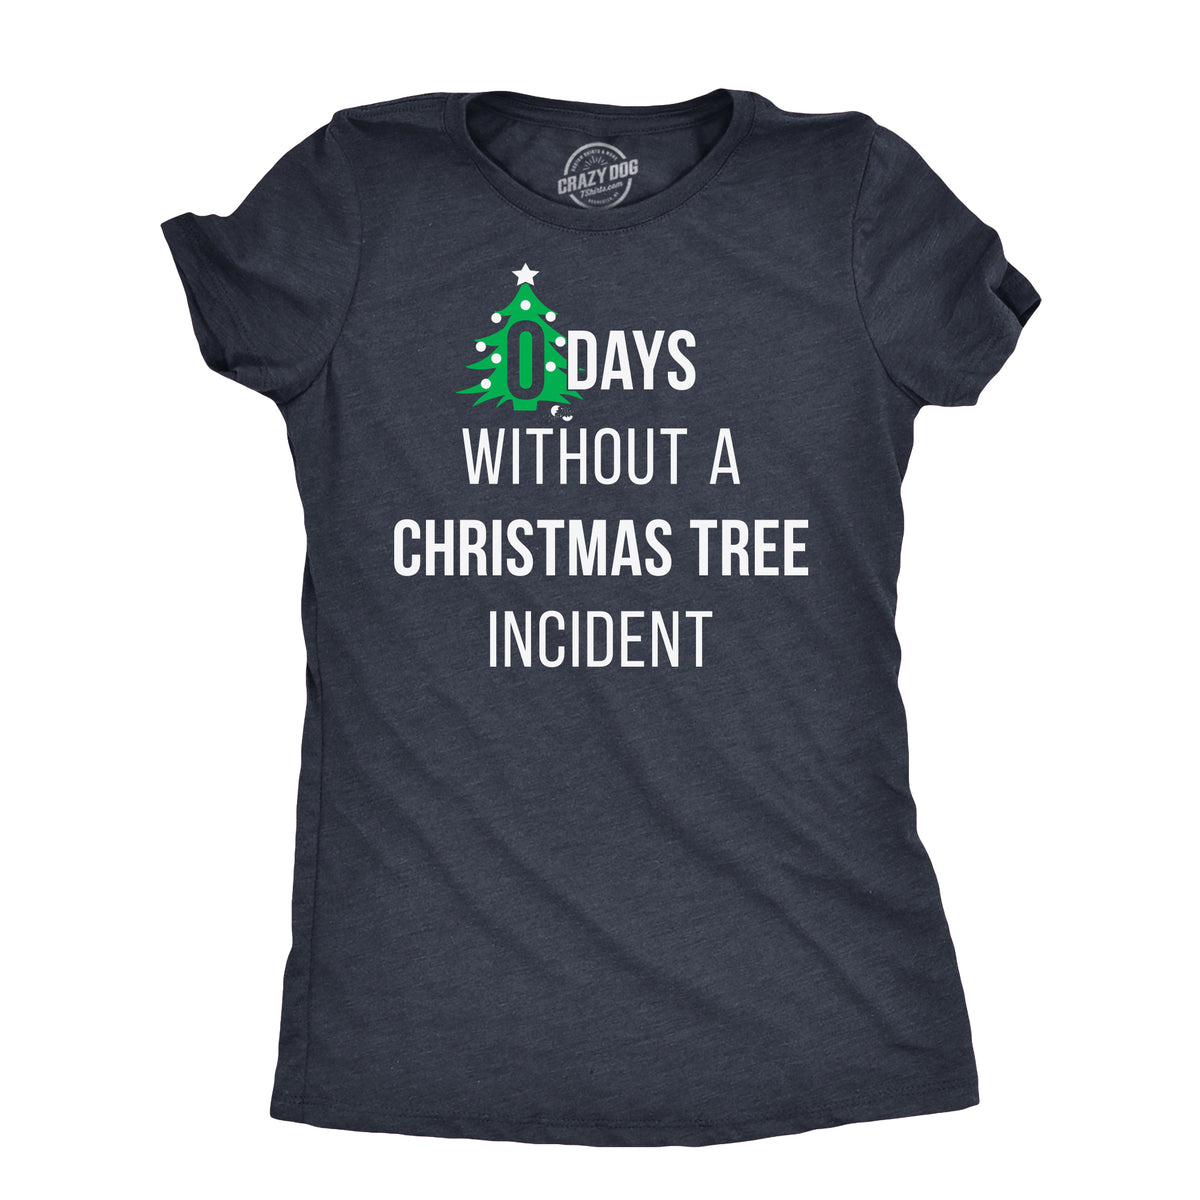 Funny Heather Navy - TREE Zero Days Without A Christmas Tree Incident Womens T Shirt Nerdy Christmas sarcastic Tee